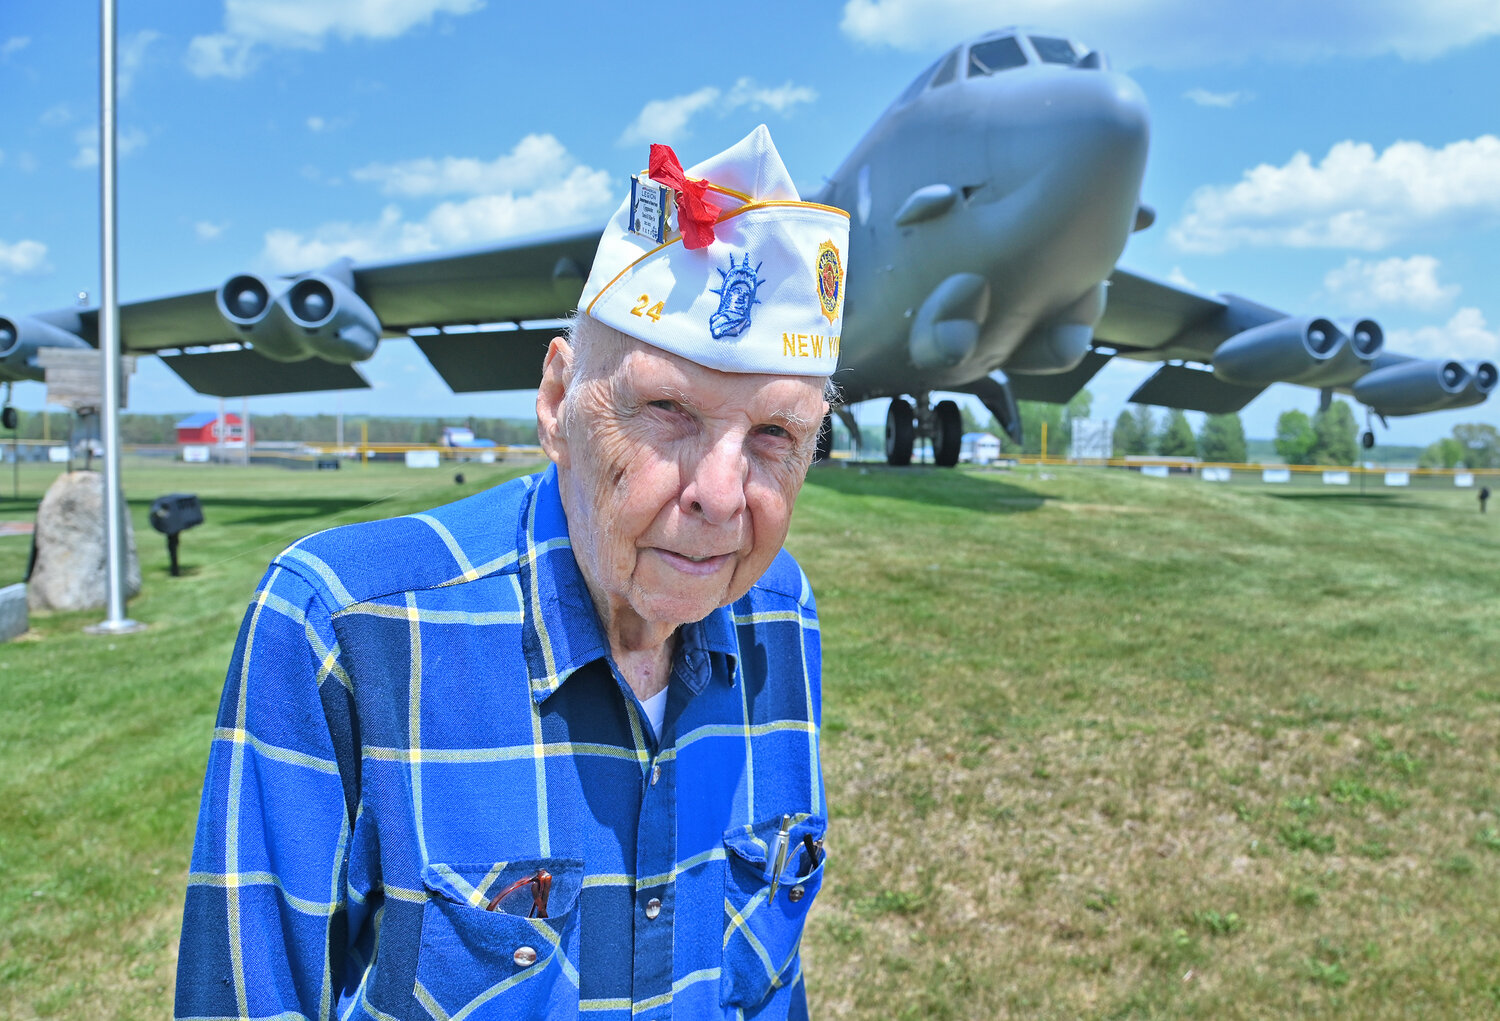 Former airman Thomas Kenealy Sr., age 92, has lived in Rome for more than 70s years, after being drafted into the Air Force in the 1950s and being stationed at the former Griffiss Air Force Base. In all his years, Kenealy has worked tirelessly to honor the city's veterans. He was even on the committee to bring the B-52 bomber to Rome, where it still stands to this day.